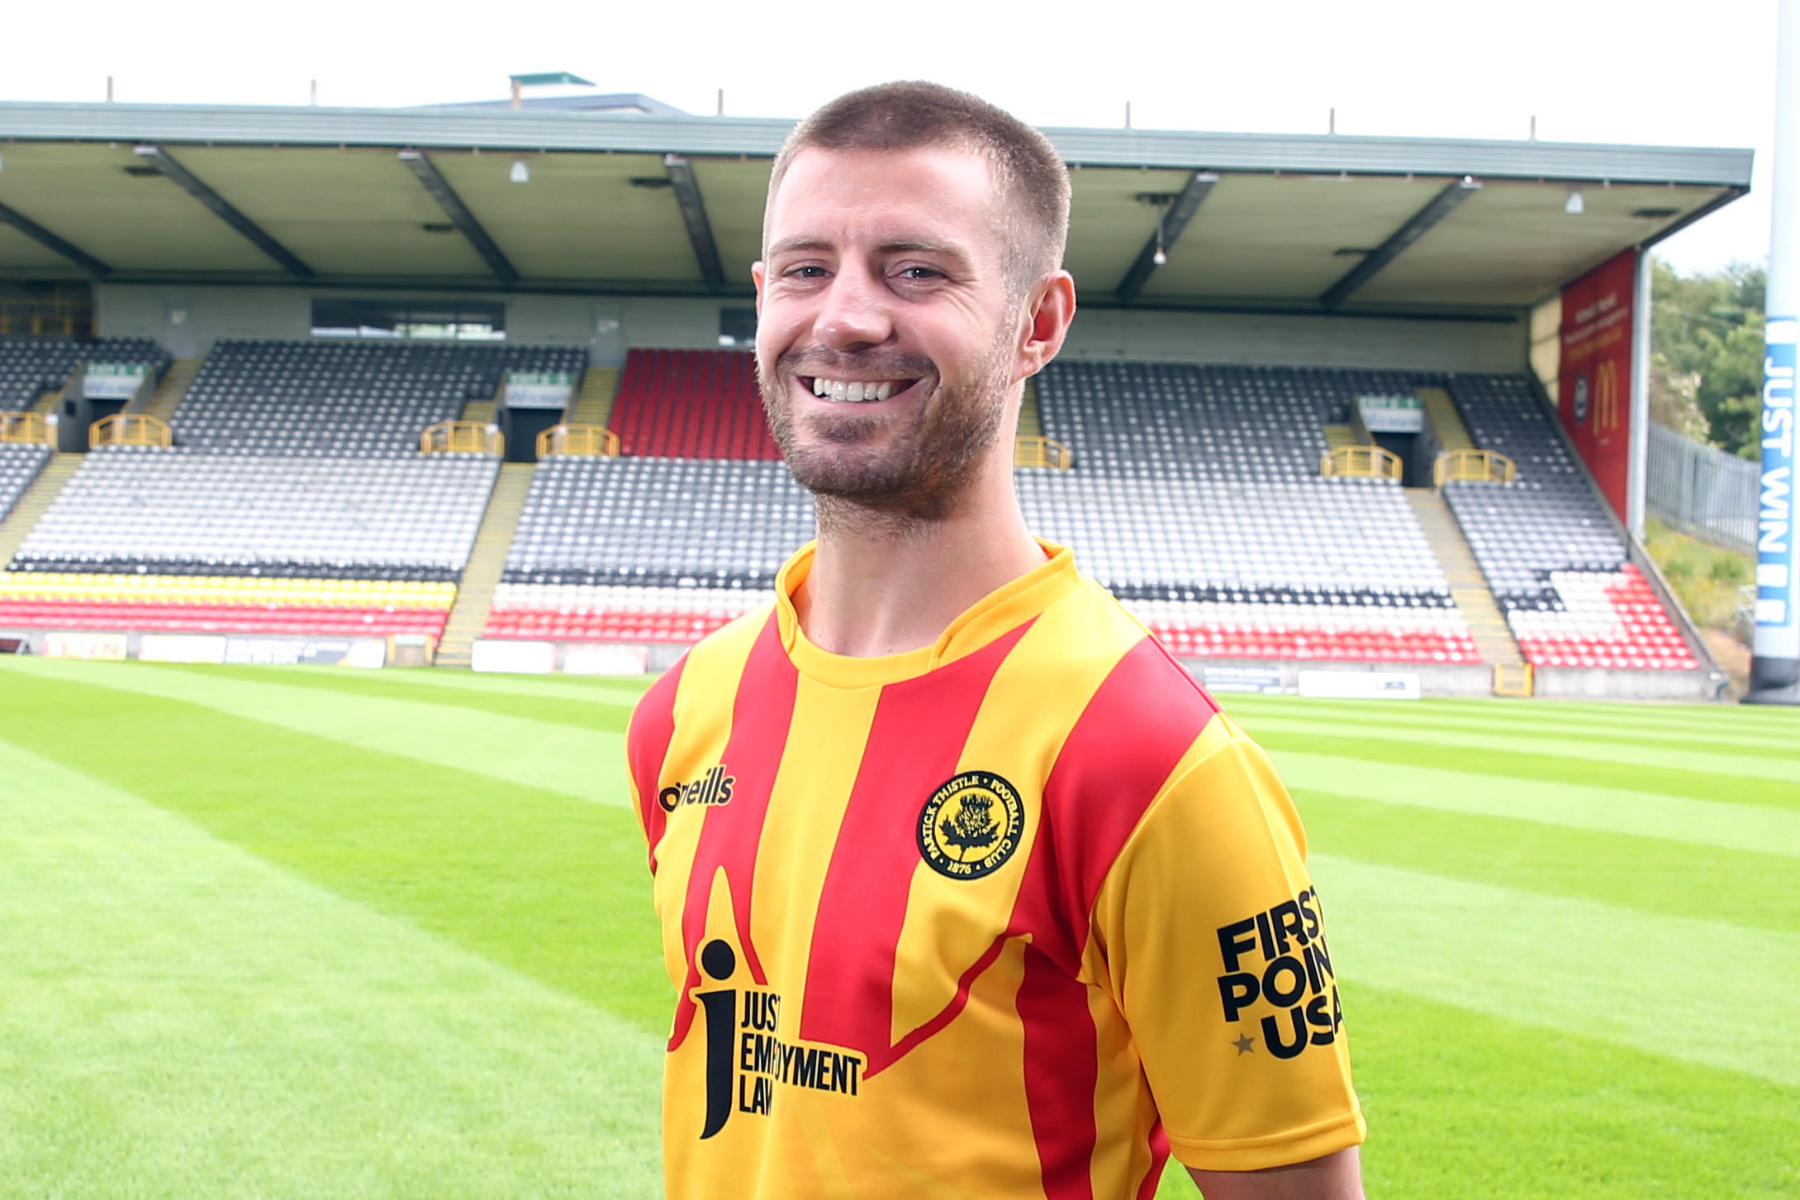 Partick Thistle confirm Kingsley kit with shirts available to buy soon